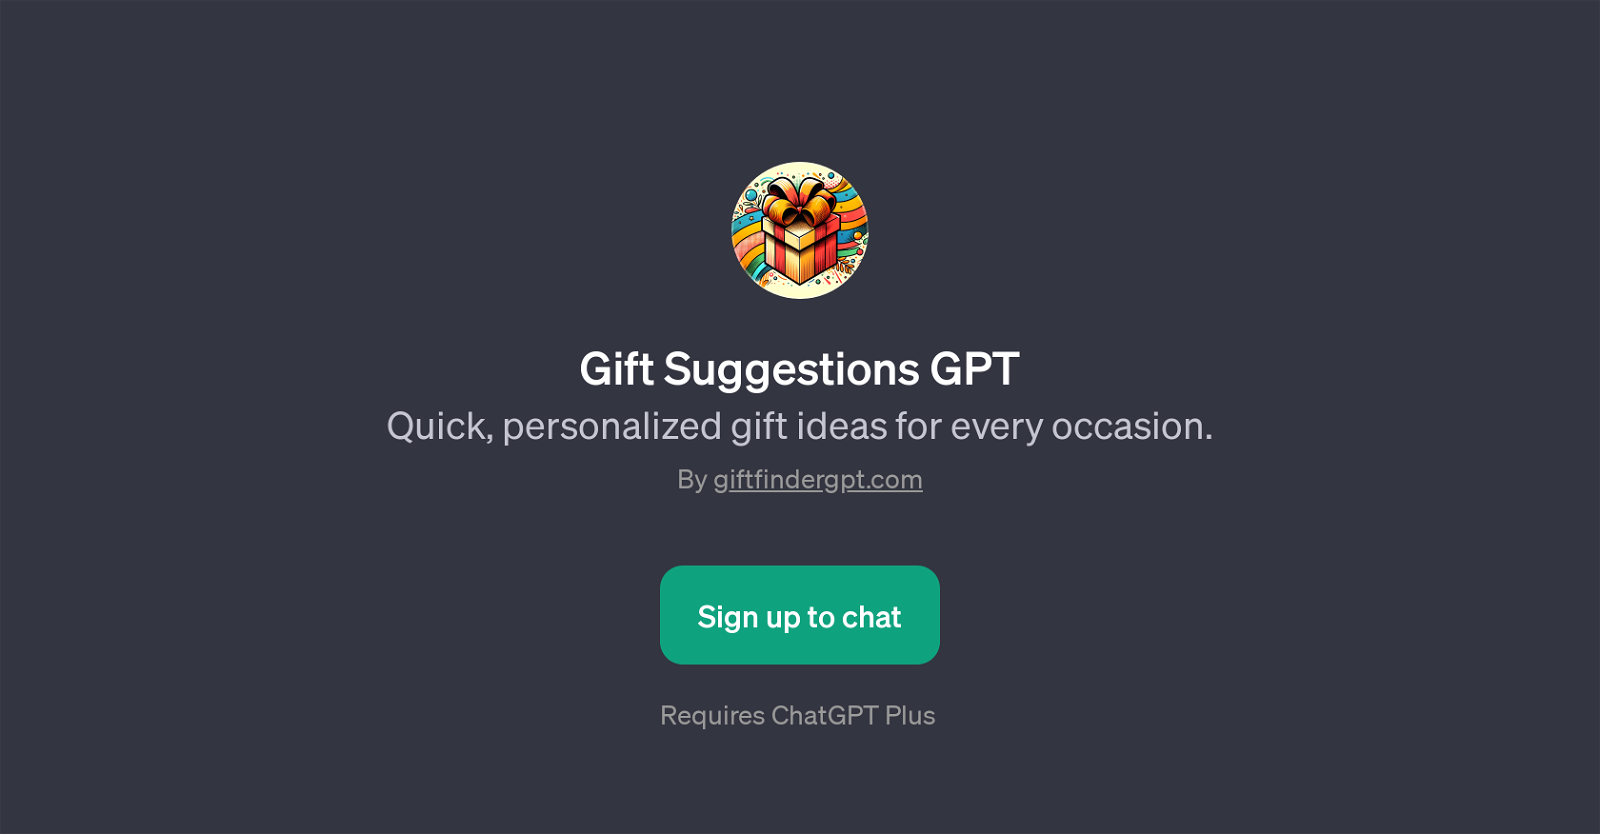 Gift Suggestions GPT website